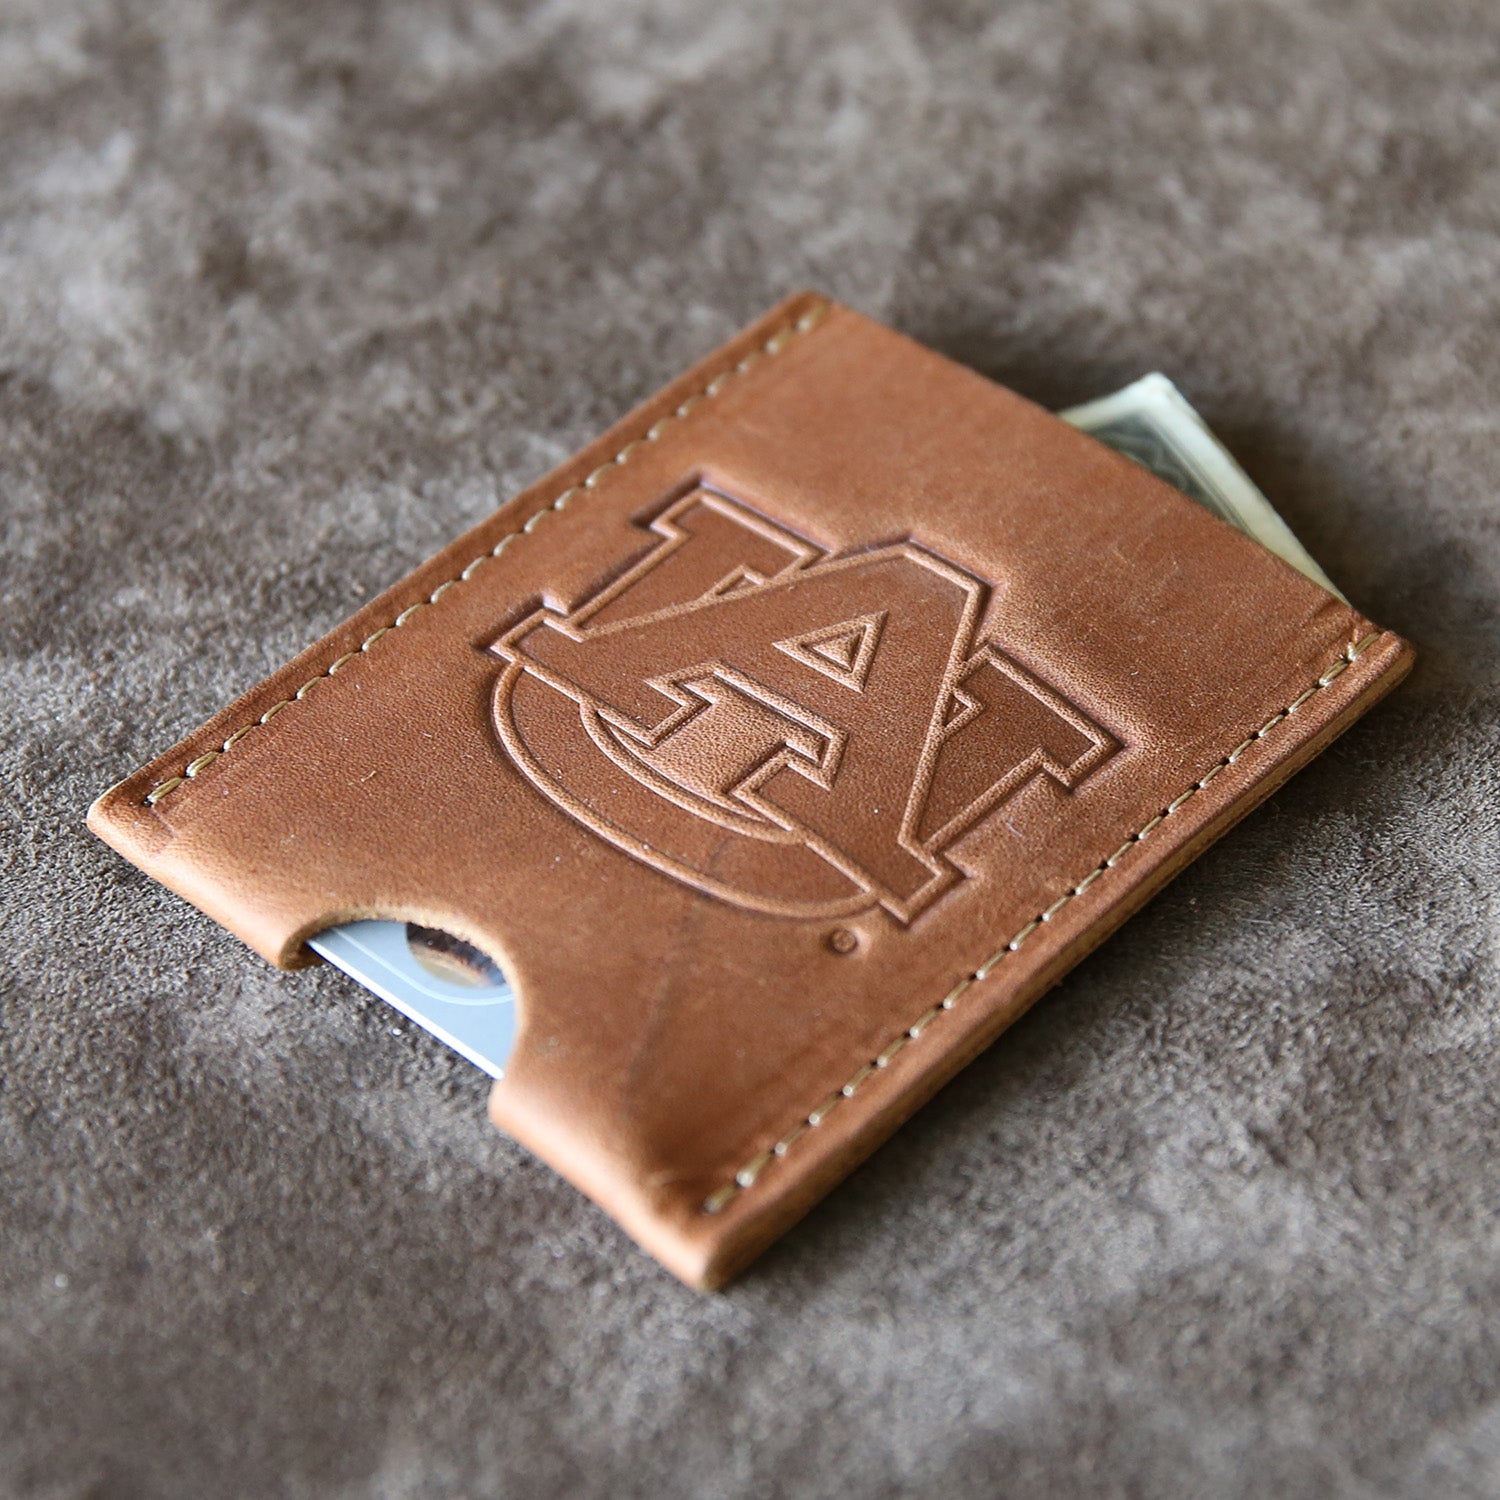 Mens Wallets - Handcrafted Fine Leather Wallets - Holtz Leather Co.